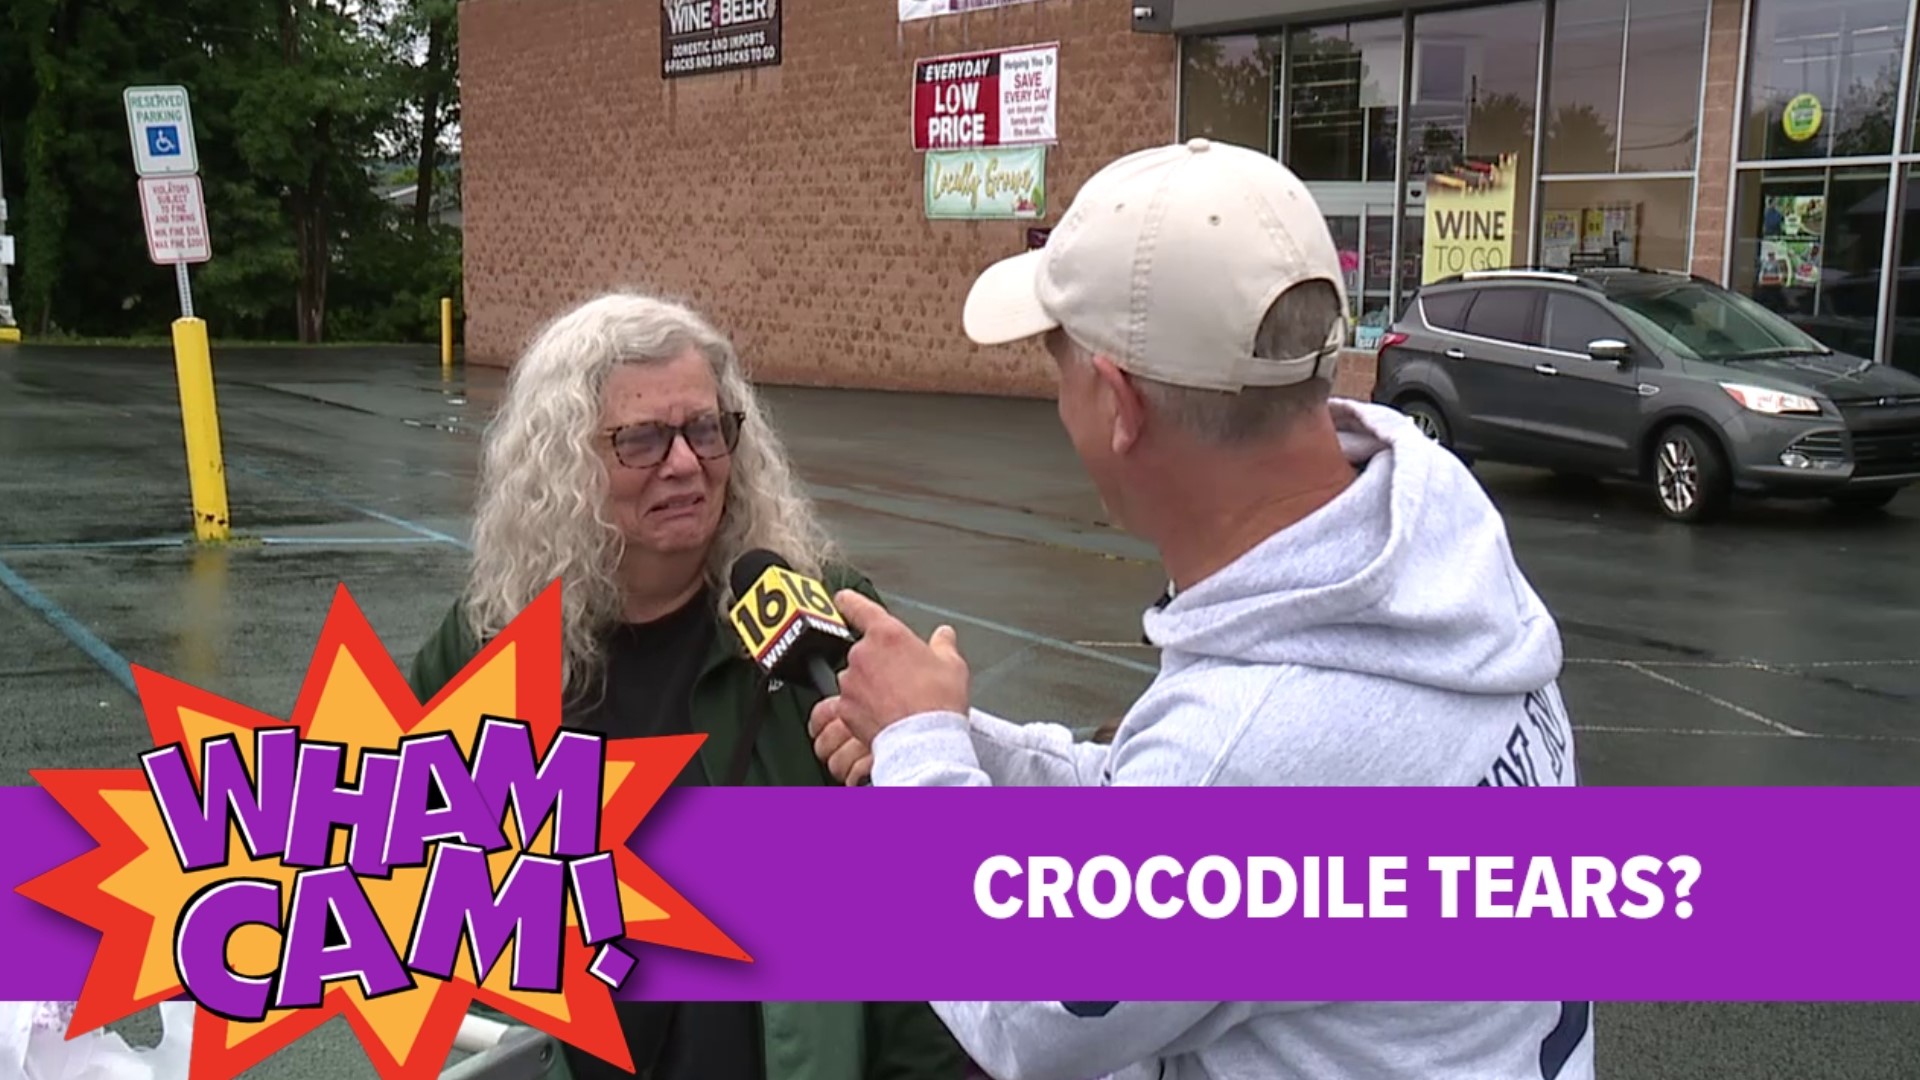 Ever heard of crocodile tears? Joe and his "crocs" headed to Gerrity's in Moosic to see if anyone there could shed light on the origin of this phrase.